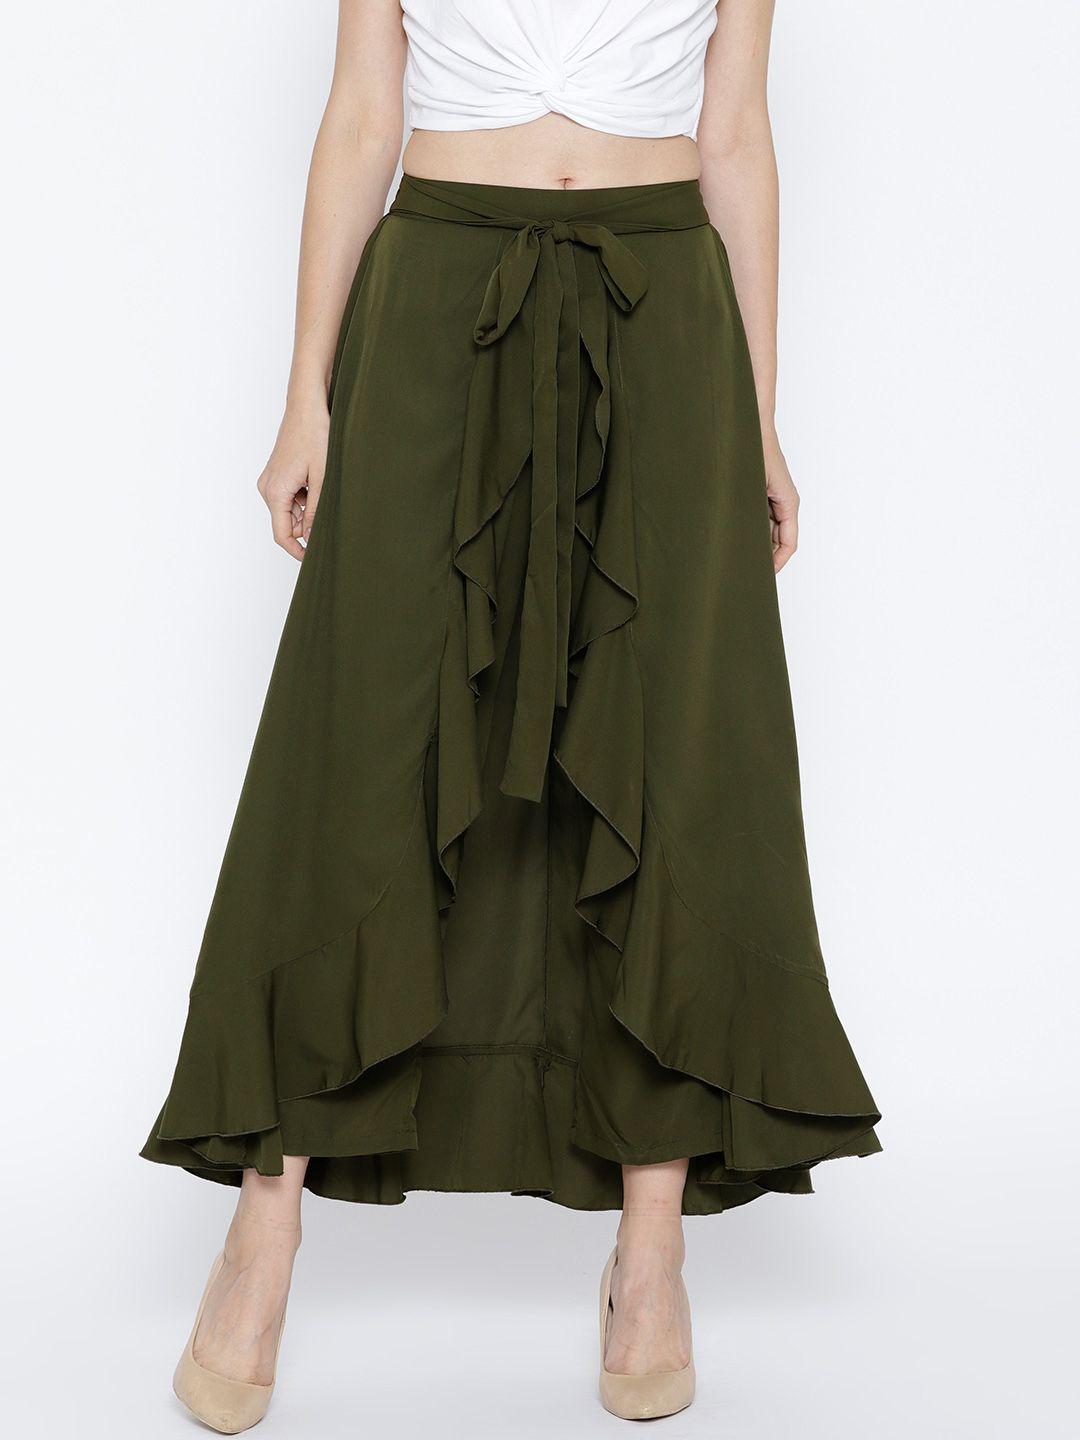 berrylush olive green solid ruffled flared maxi skirt with attached trousers